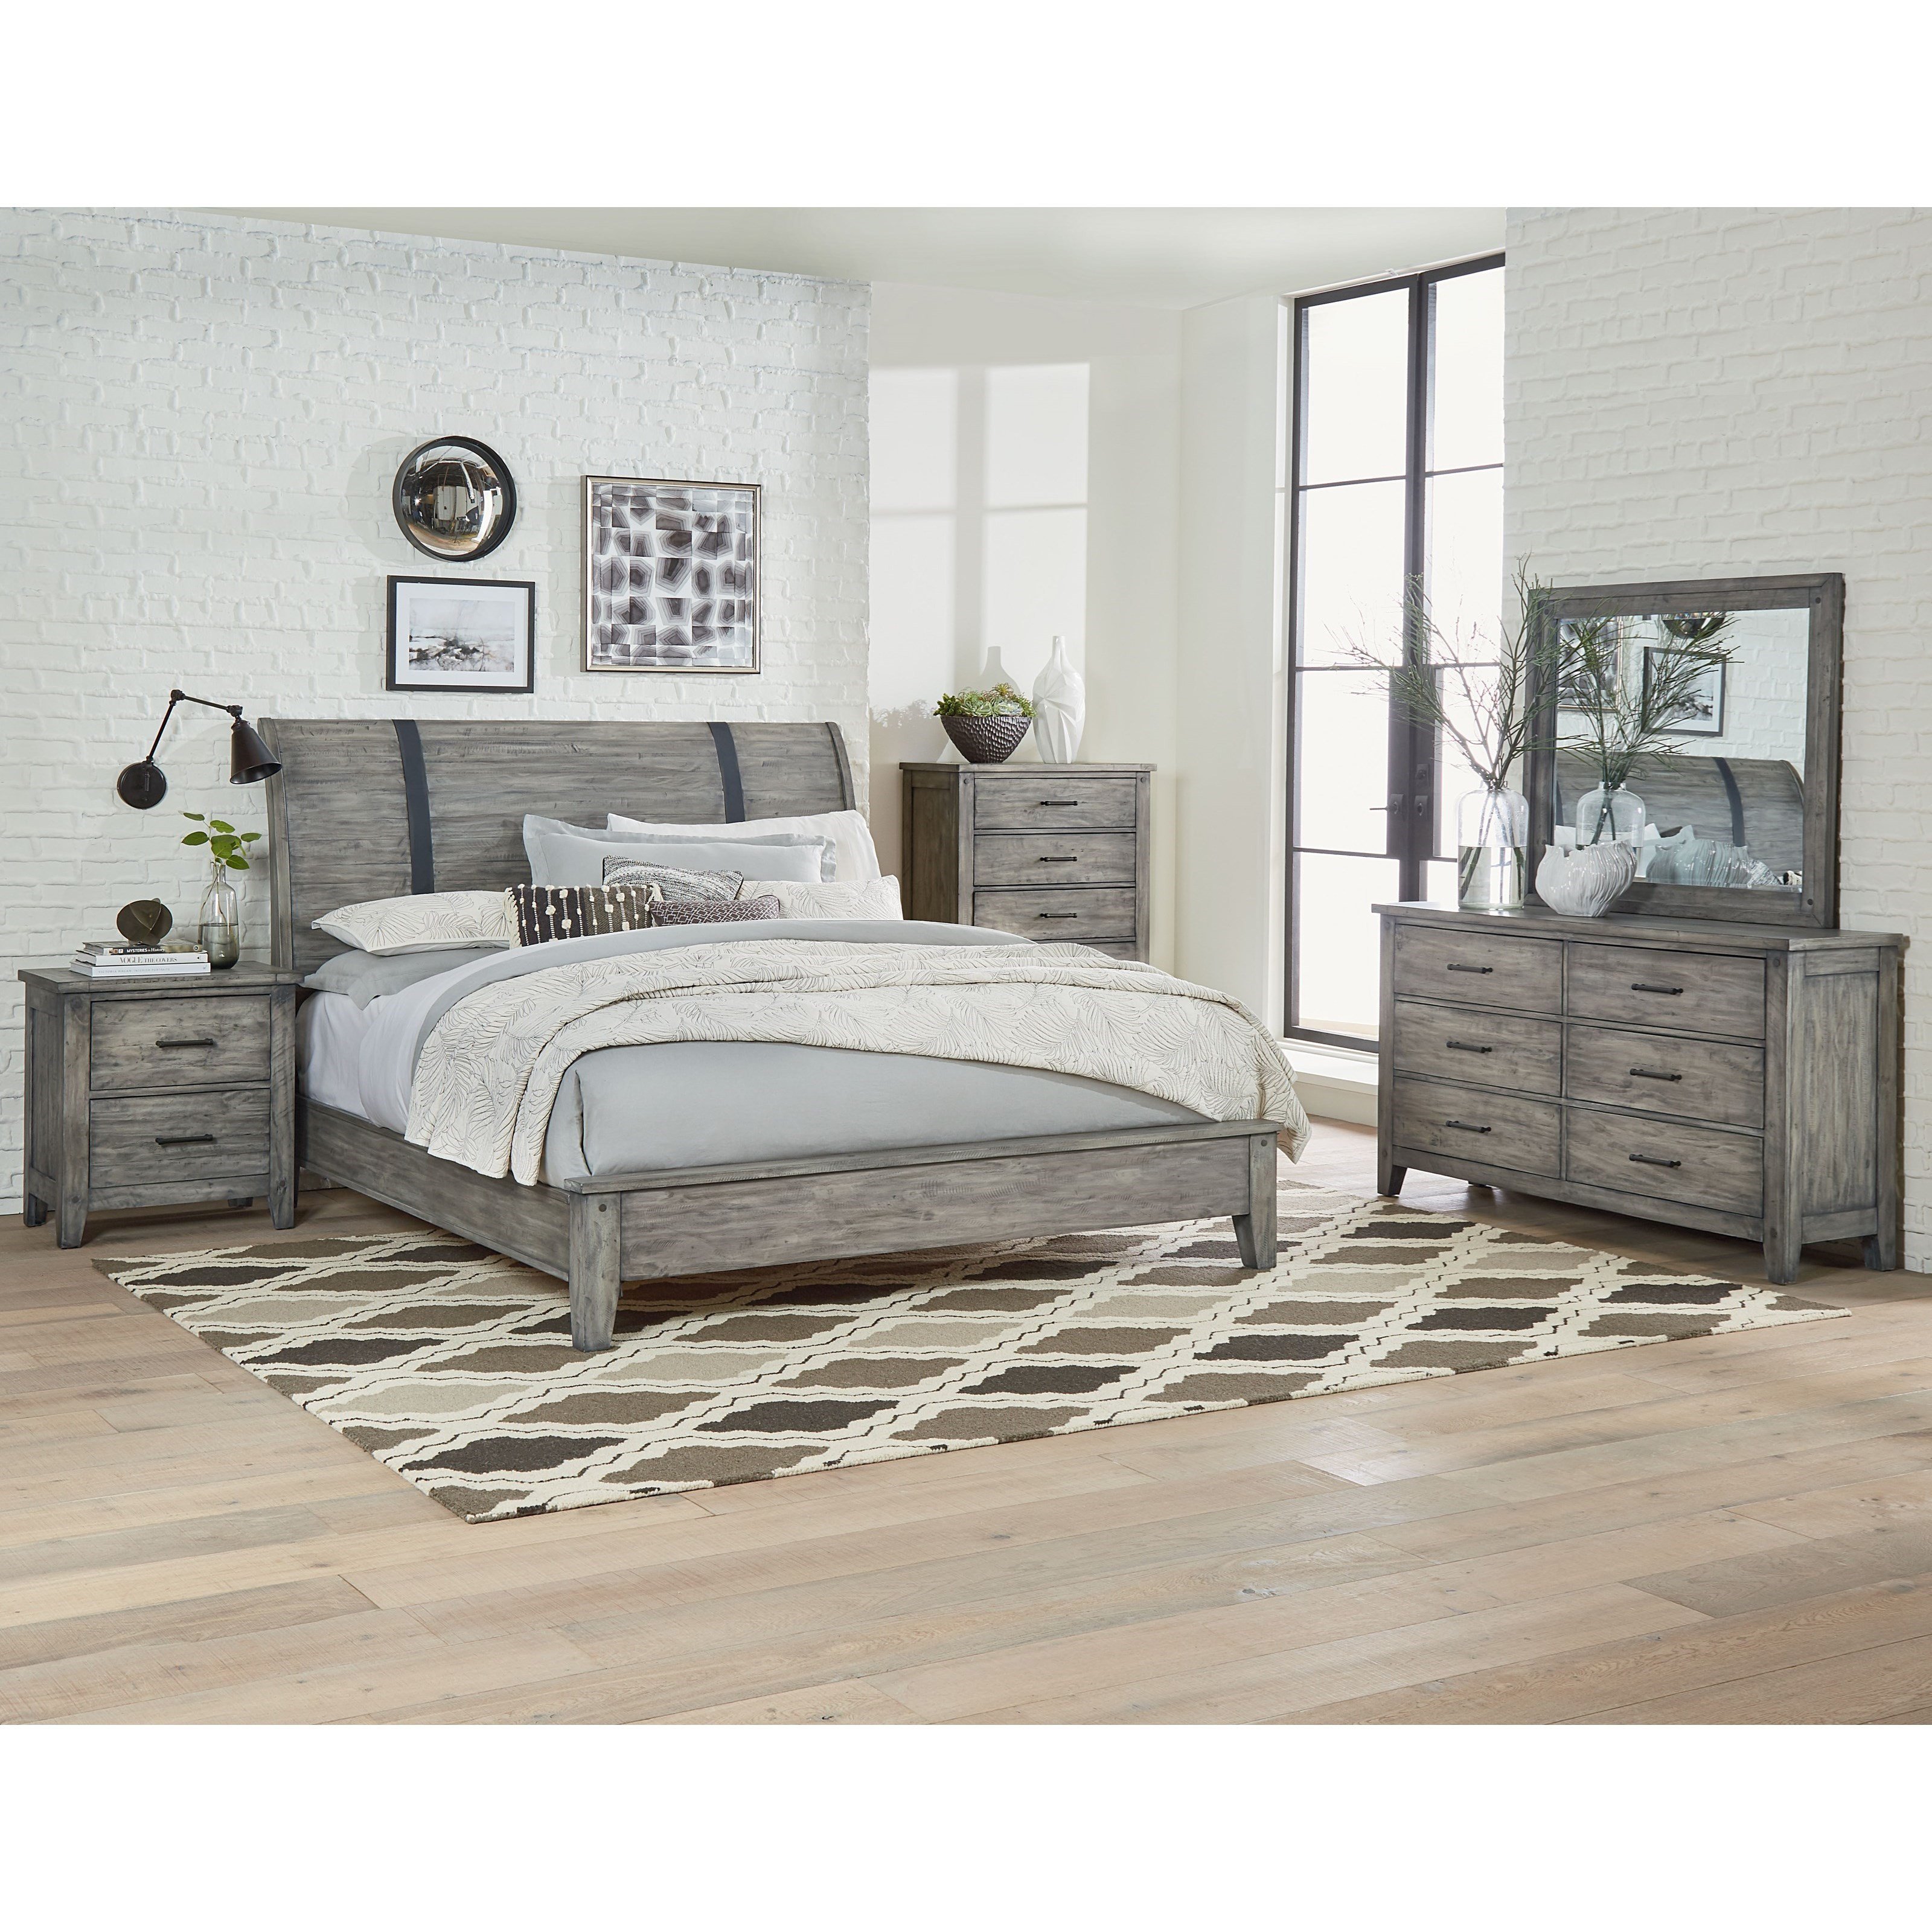 Rustic King Bedroom Set Awesome Standard Furniture Nelson Queen Bedroom Group